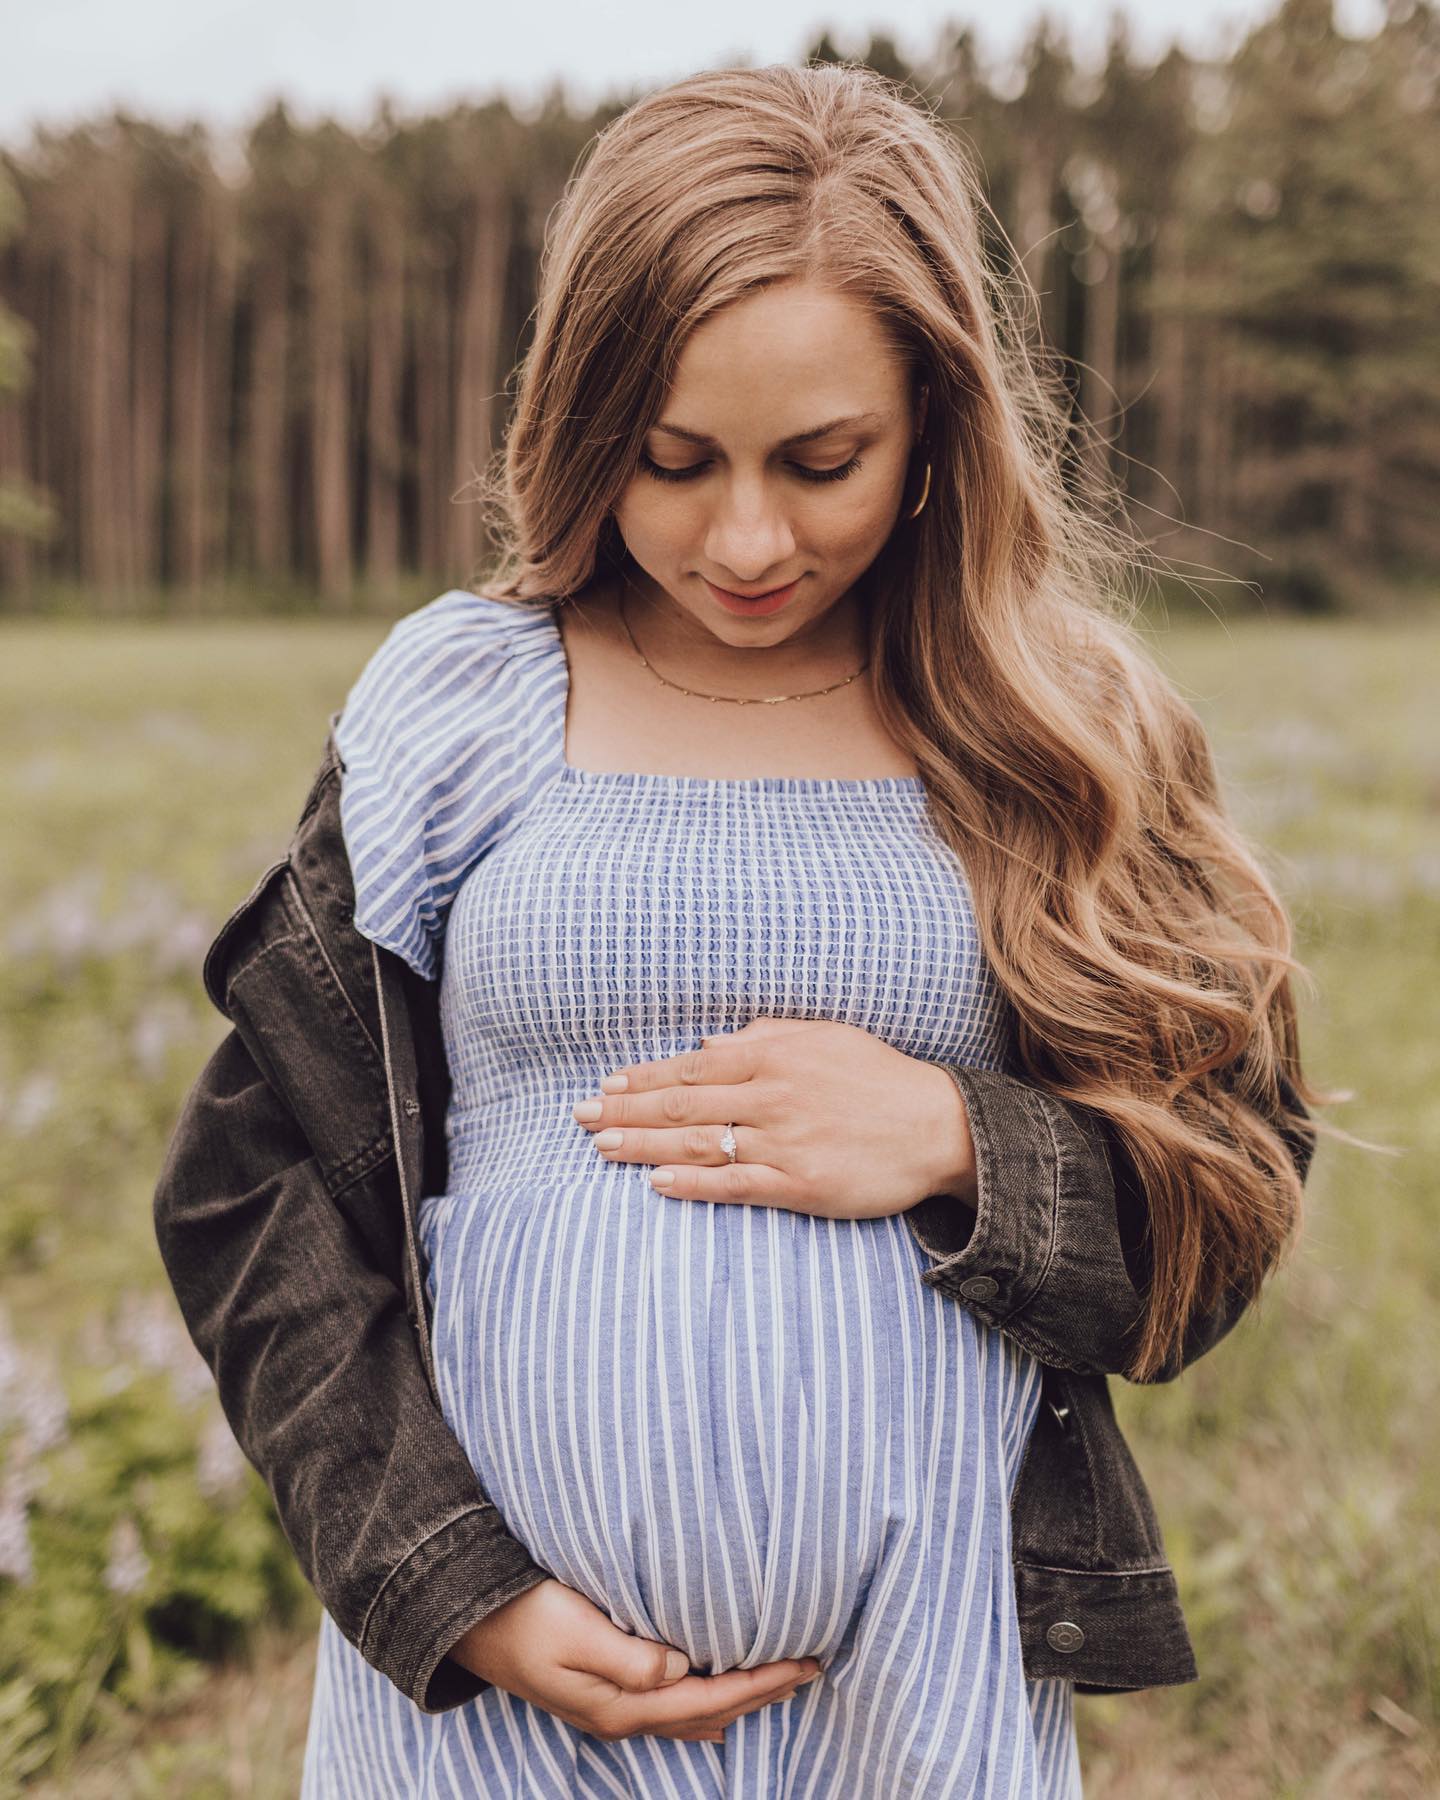 Pregnancy has been wonderful and at times very hard. Nausea, indigestion, carpal tunnel, and other symptoms have challenged me. But ultimately, I will miss feeling baby’s kicks and being his home. It’s truly a miracle and I’m so grateful to walk through this amazing journey. 💙

Just posted a recap of my pregnancy on my blog. Link in bio 👆🏼